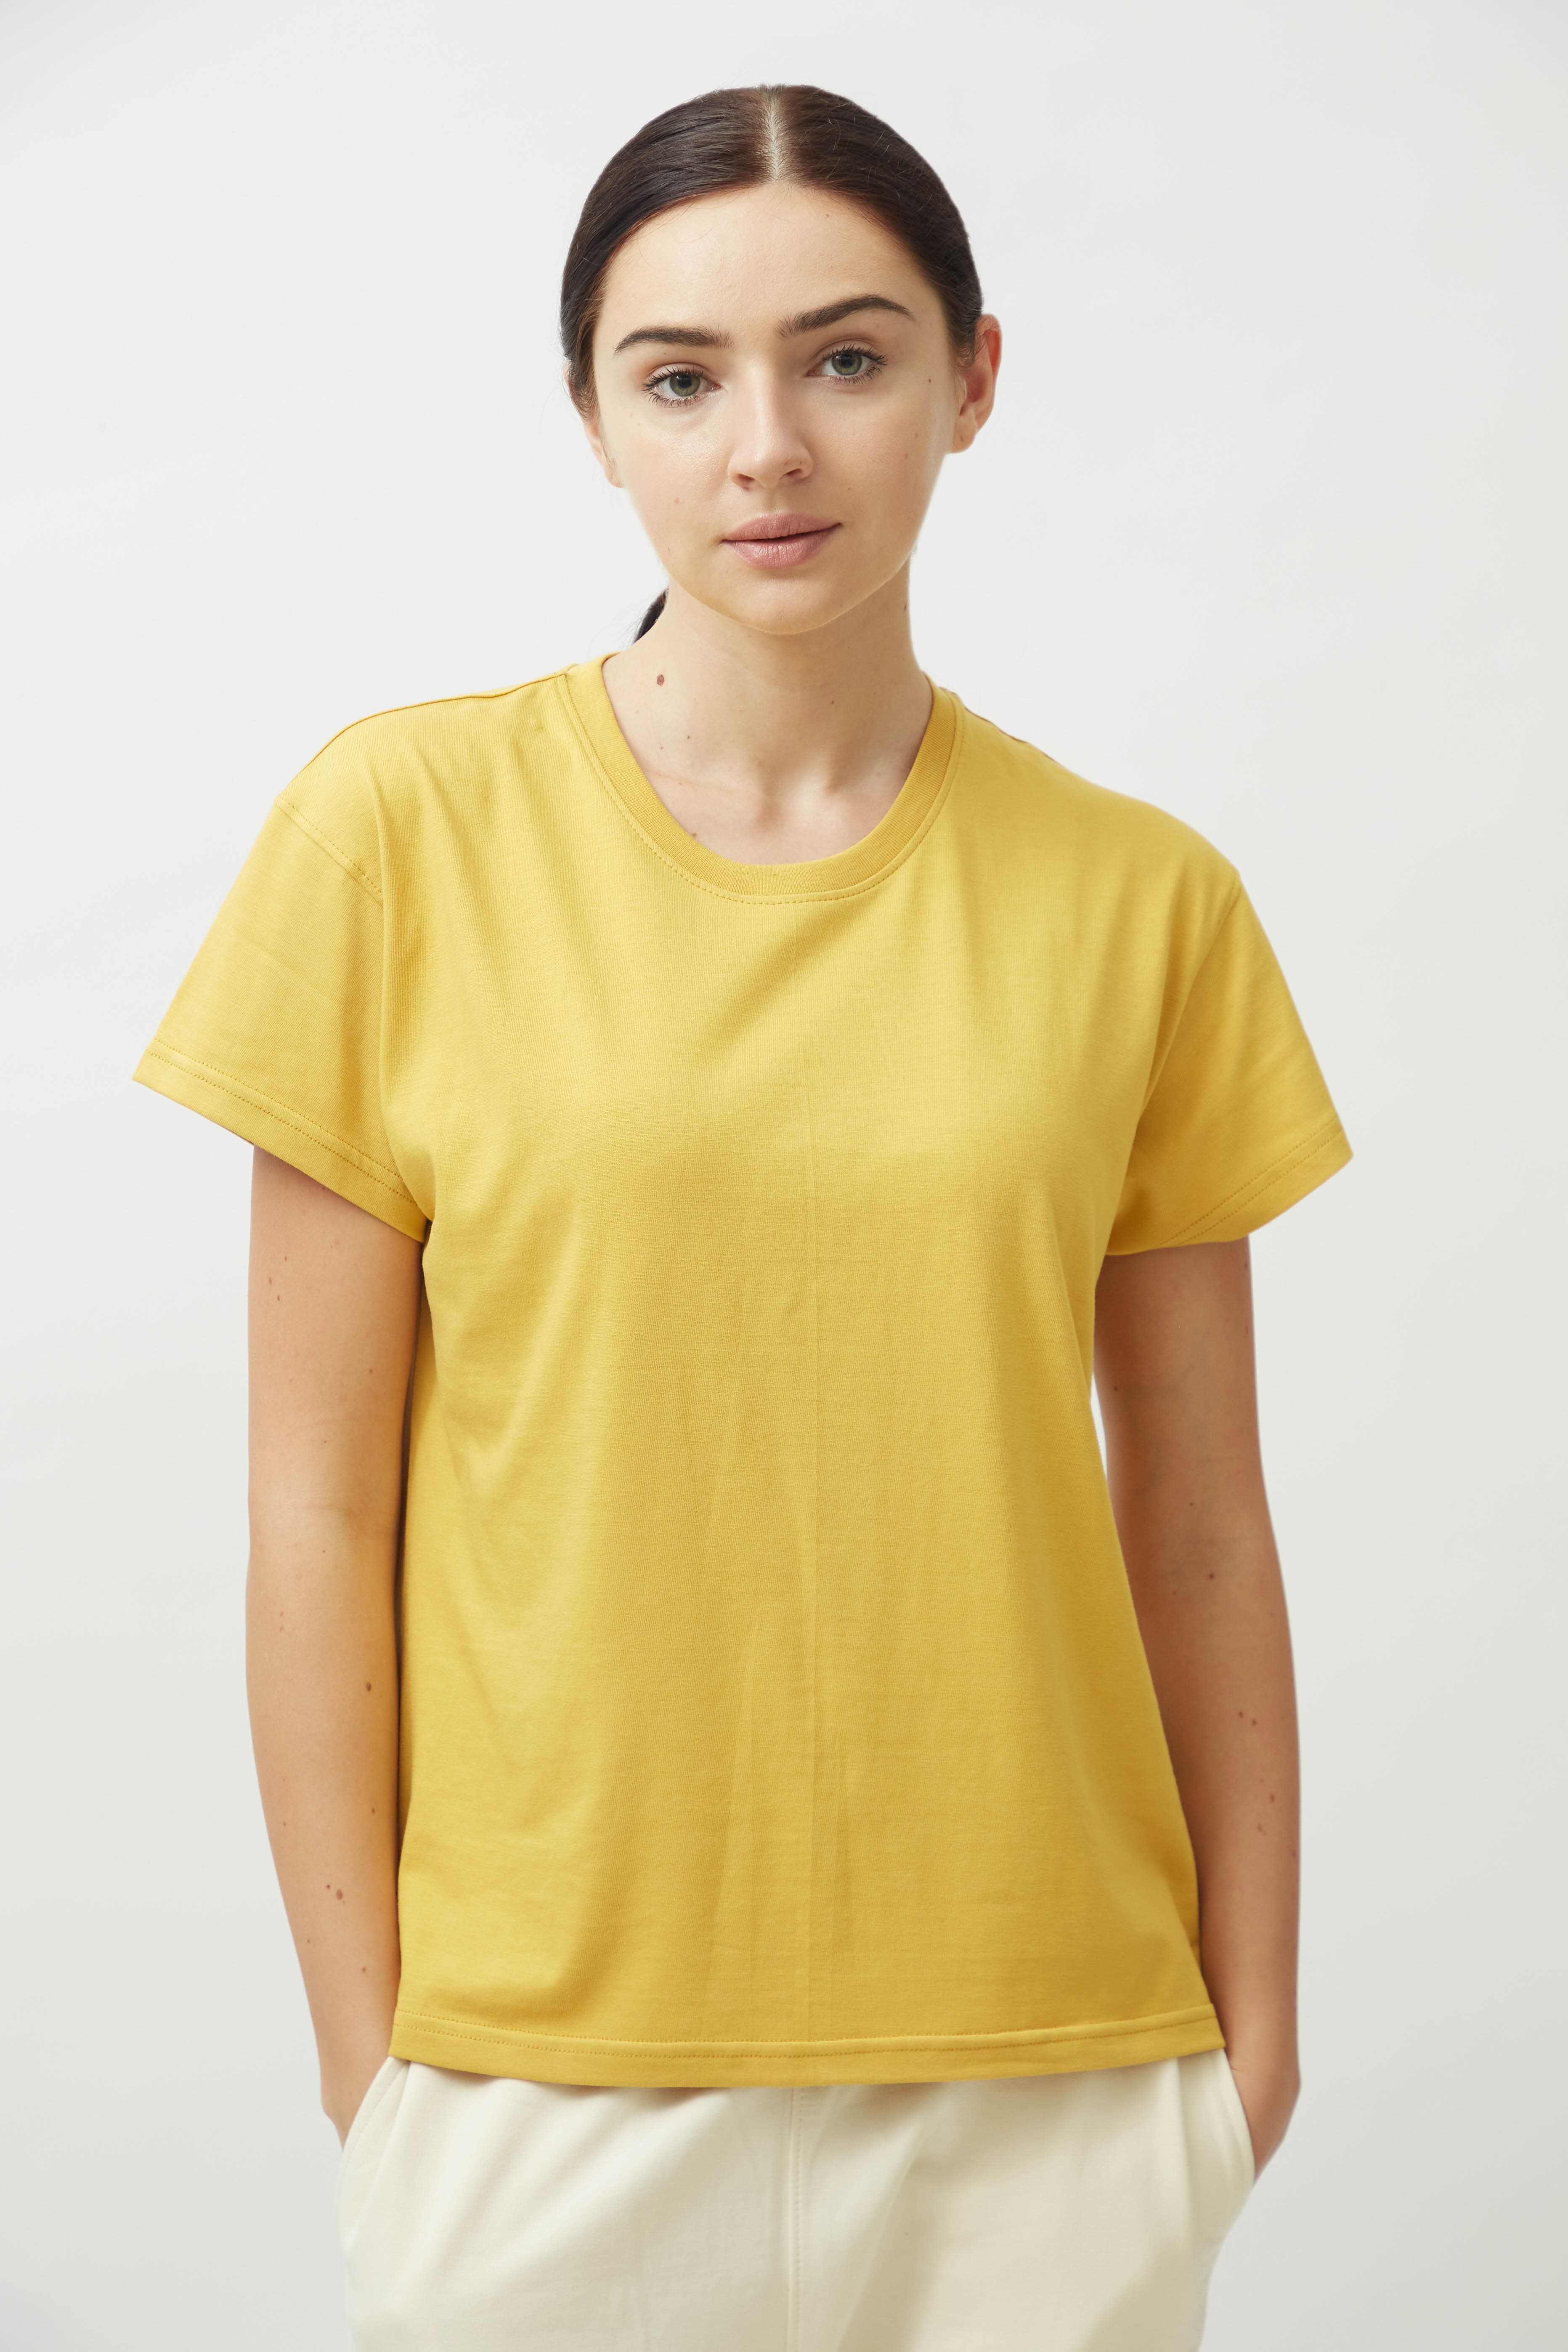 Saltpetre womens wear in bright yellow. Round neck t-shirt with half sleeves for casual and lounge wear. Made out of 100% organic cotton with straight hemline.